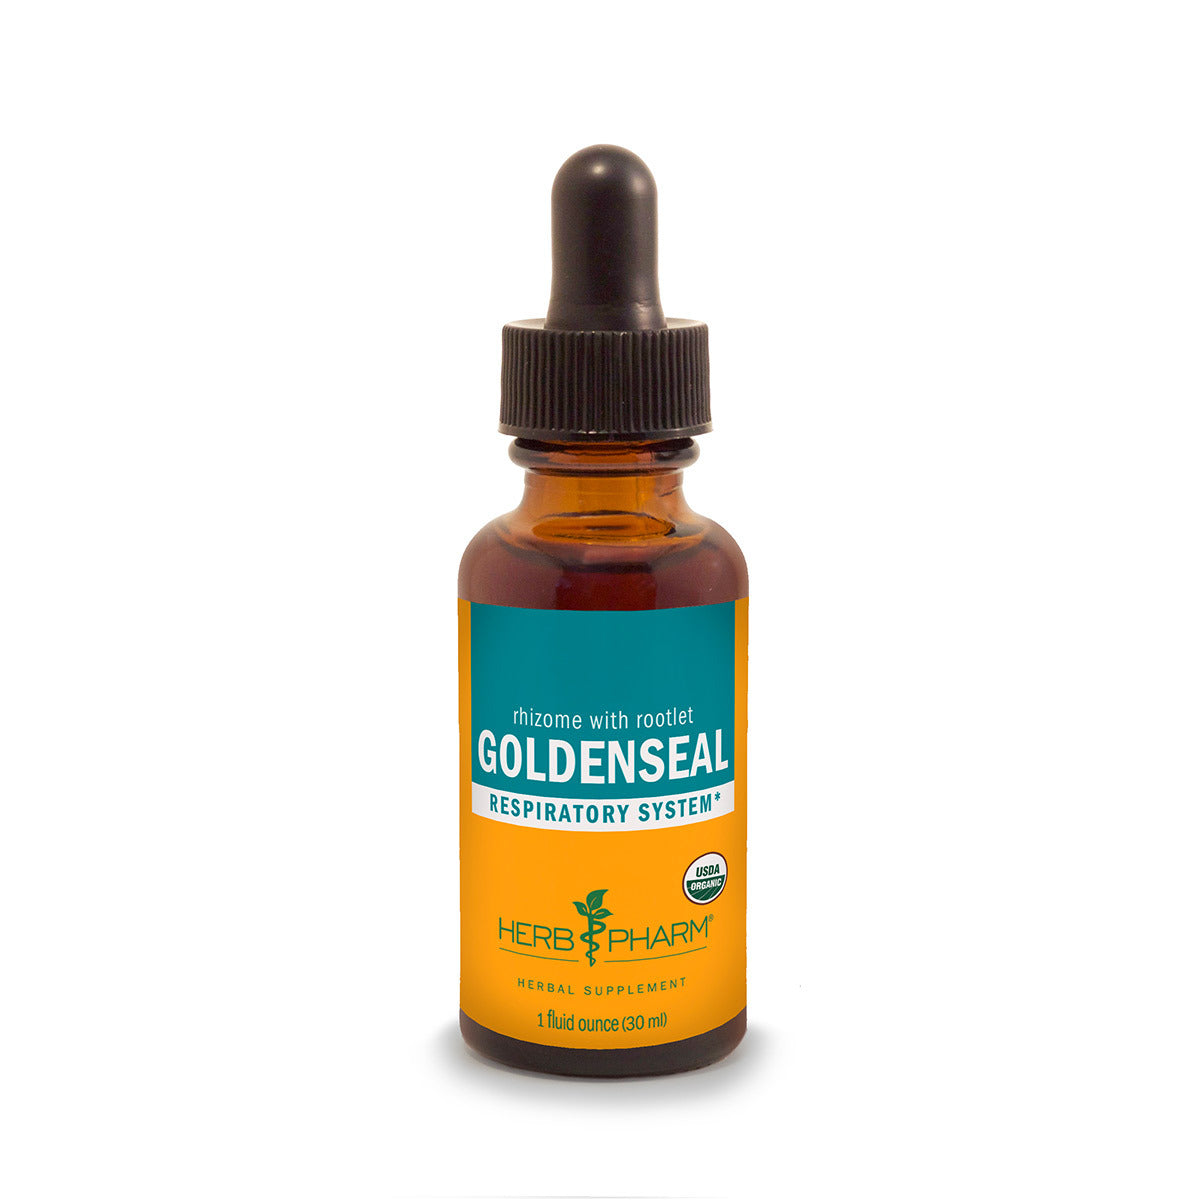 Primary image of Goldenseal Extract